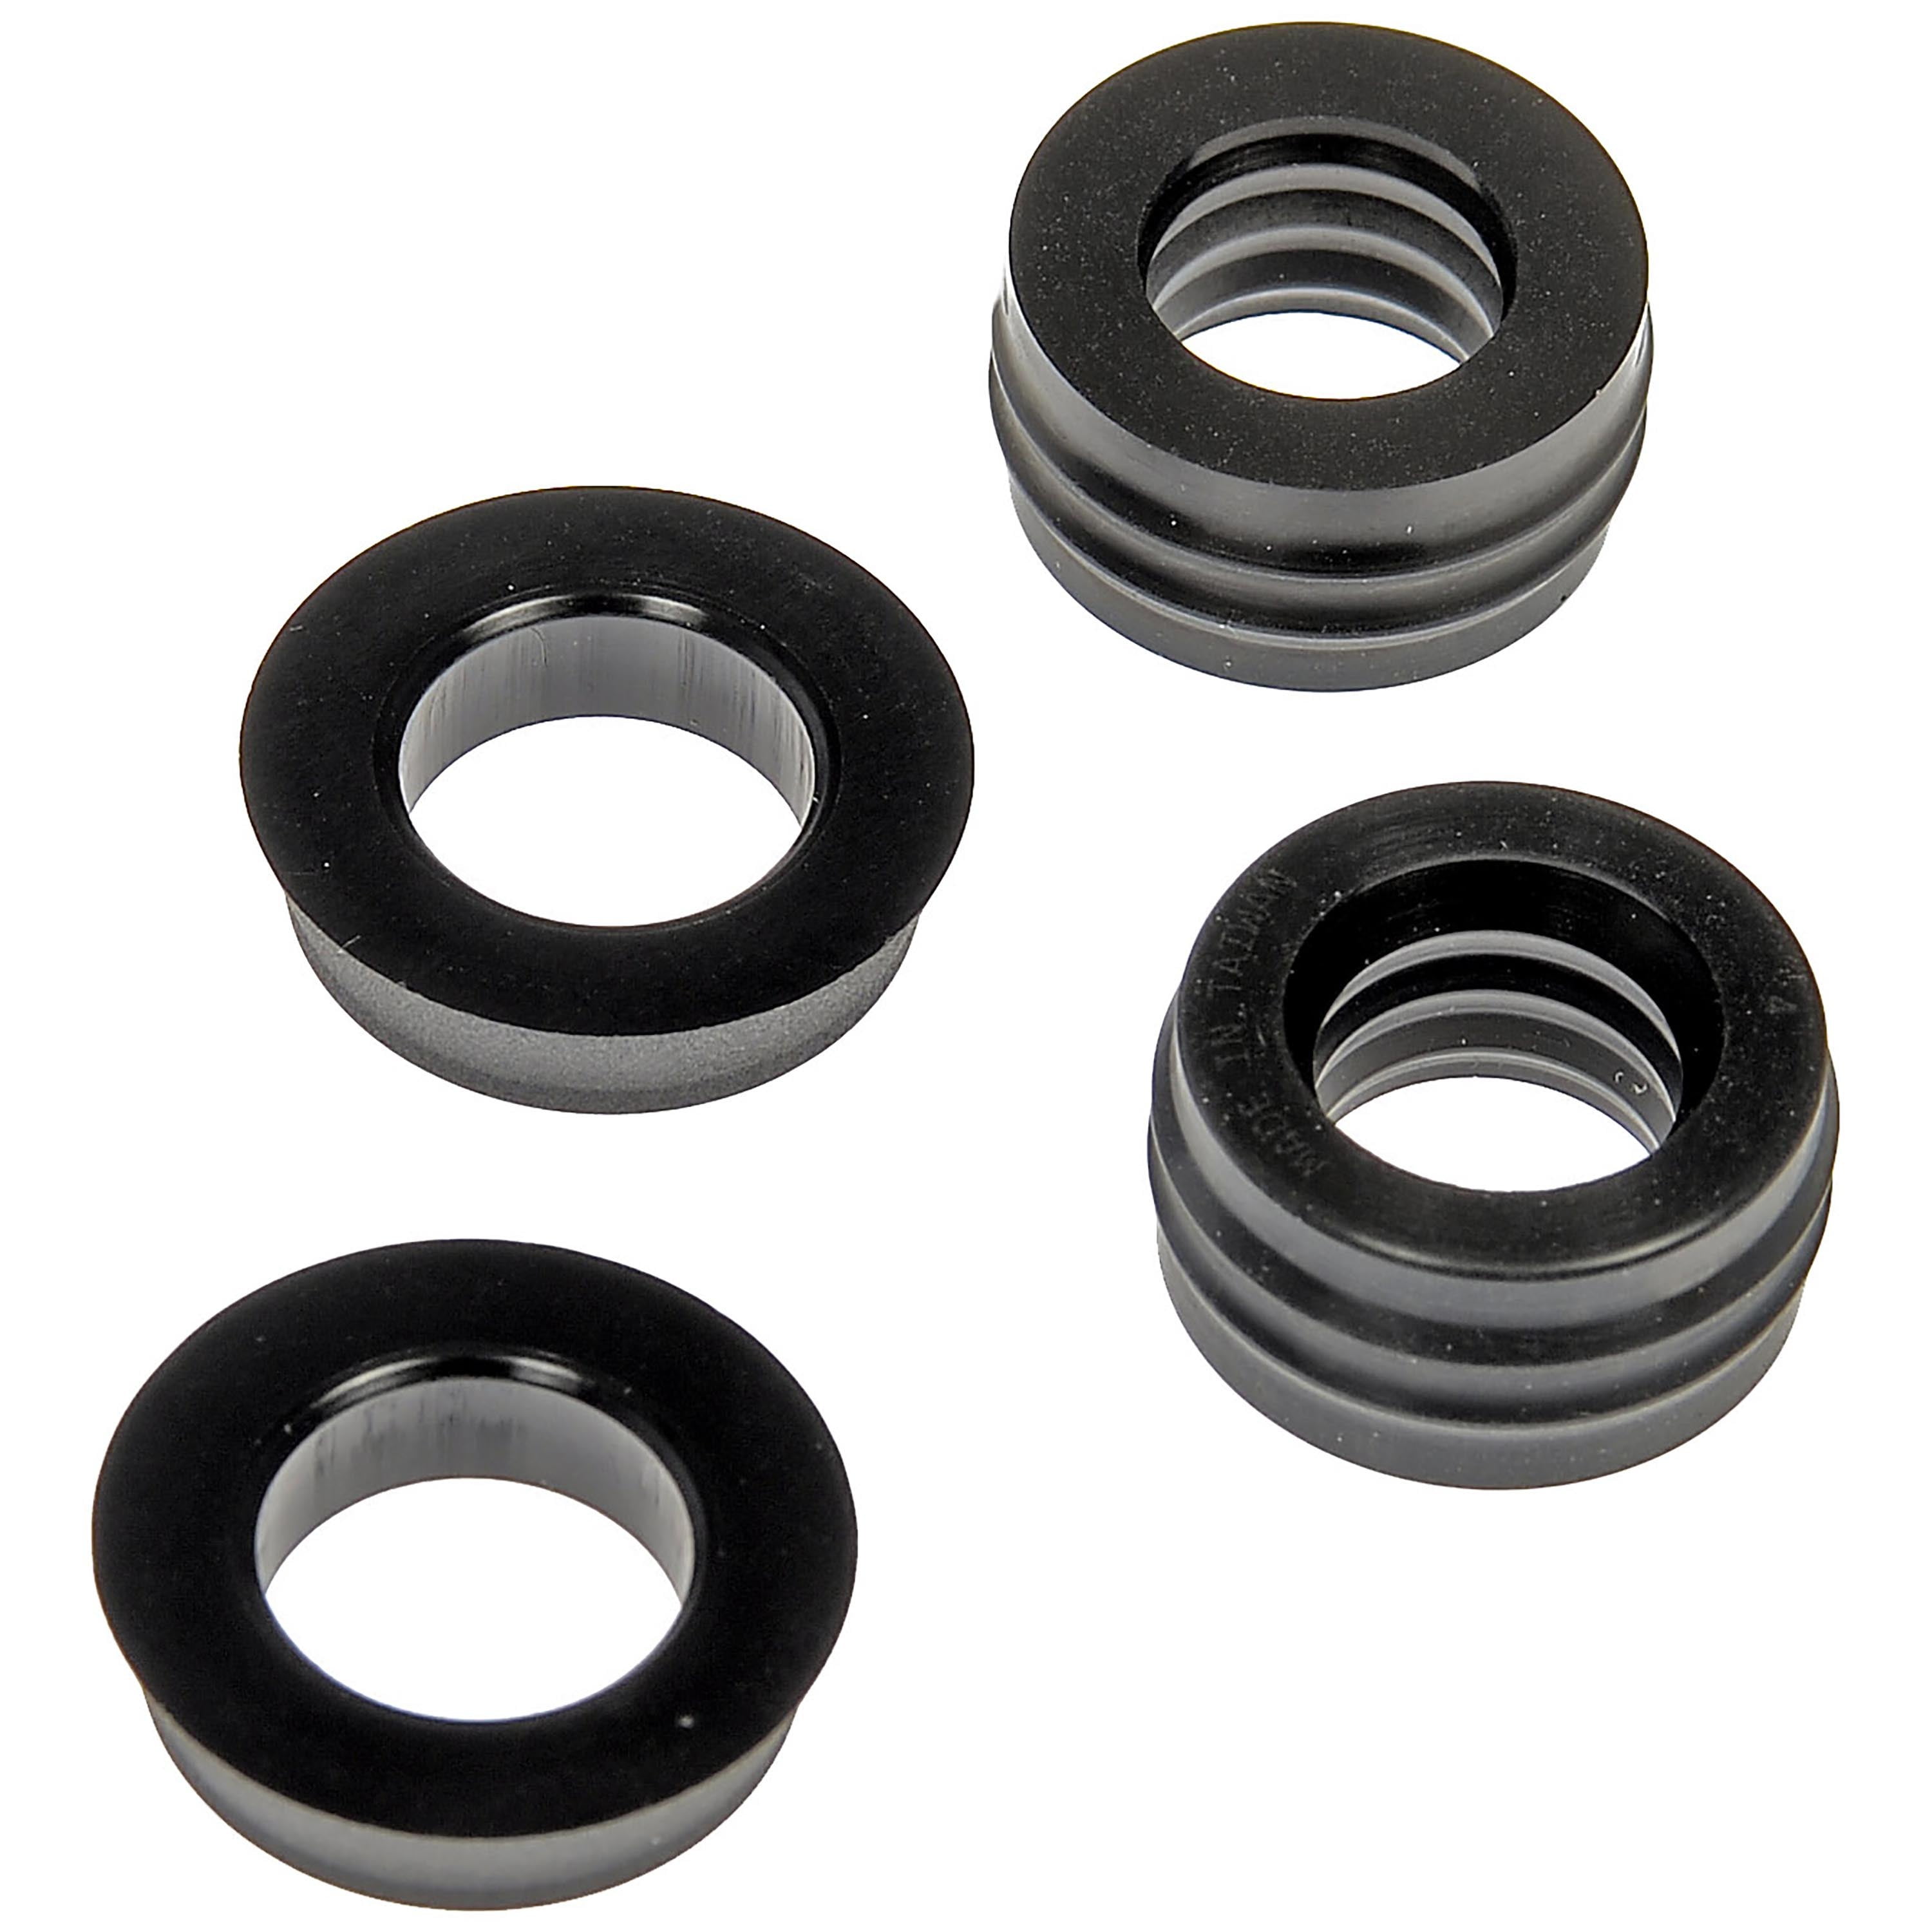 Steelbird 0SBSV3K5-B Rubber Oil Seal in Mumbai at best price by A to Z Bike  Accessories - Justdial